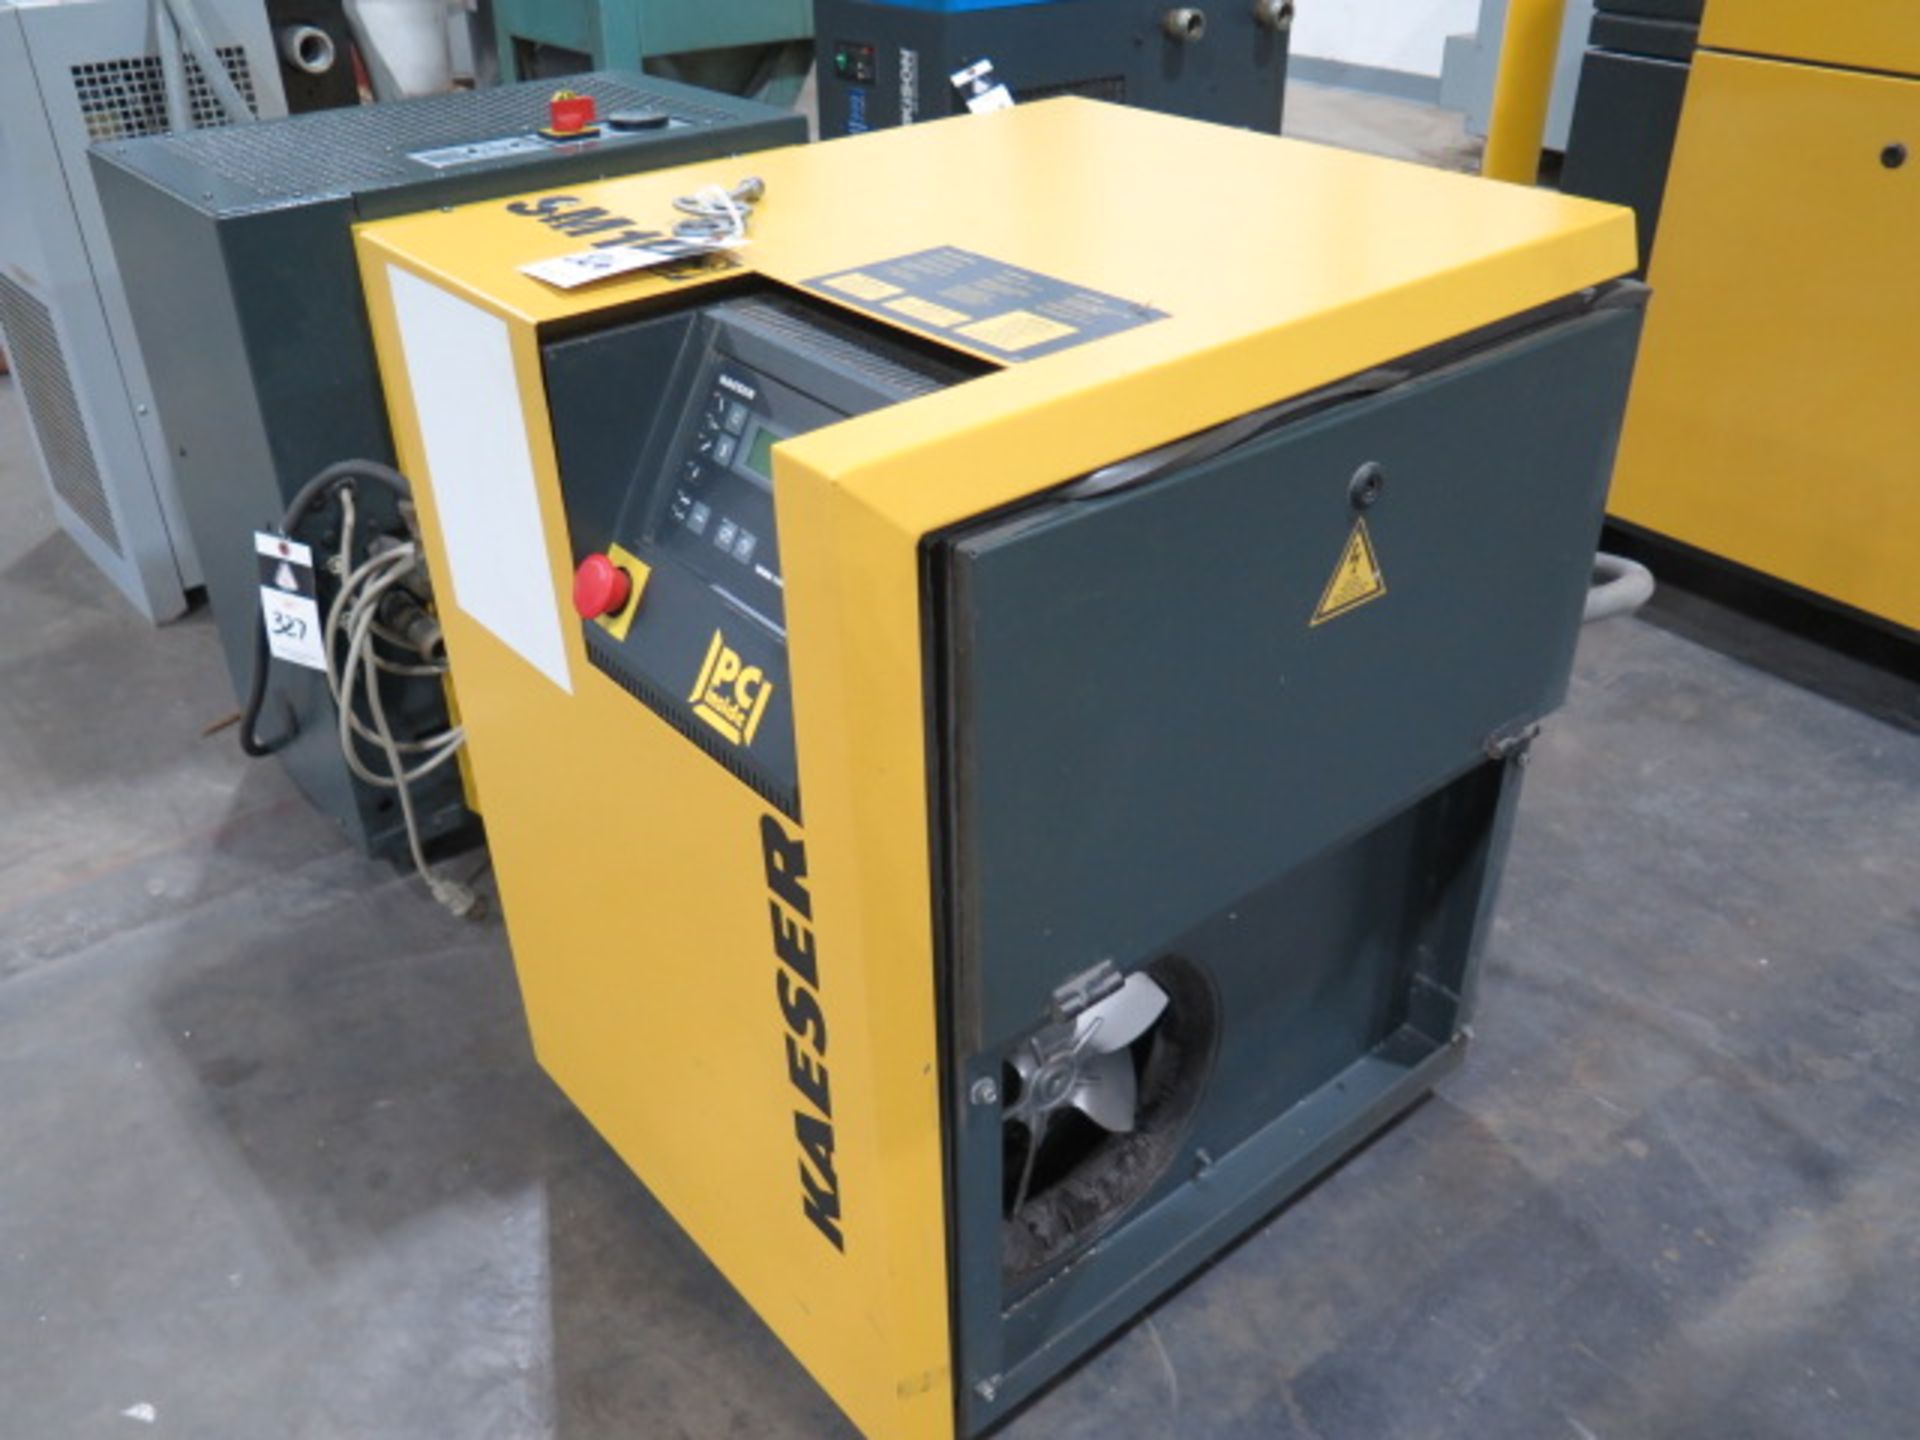 2003 Kaeser SM-11 10Hp Rotary Air Comp s/n 1488 w/ Kaeser Controls, 42 CFM @ 110 PSIG, SOLD AS IS - Image 2 of 6